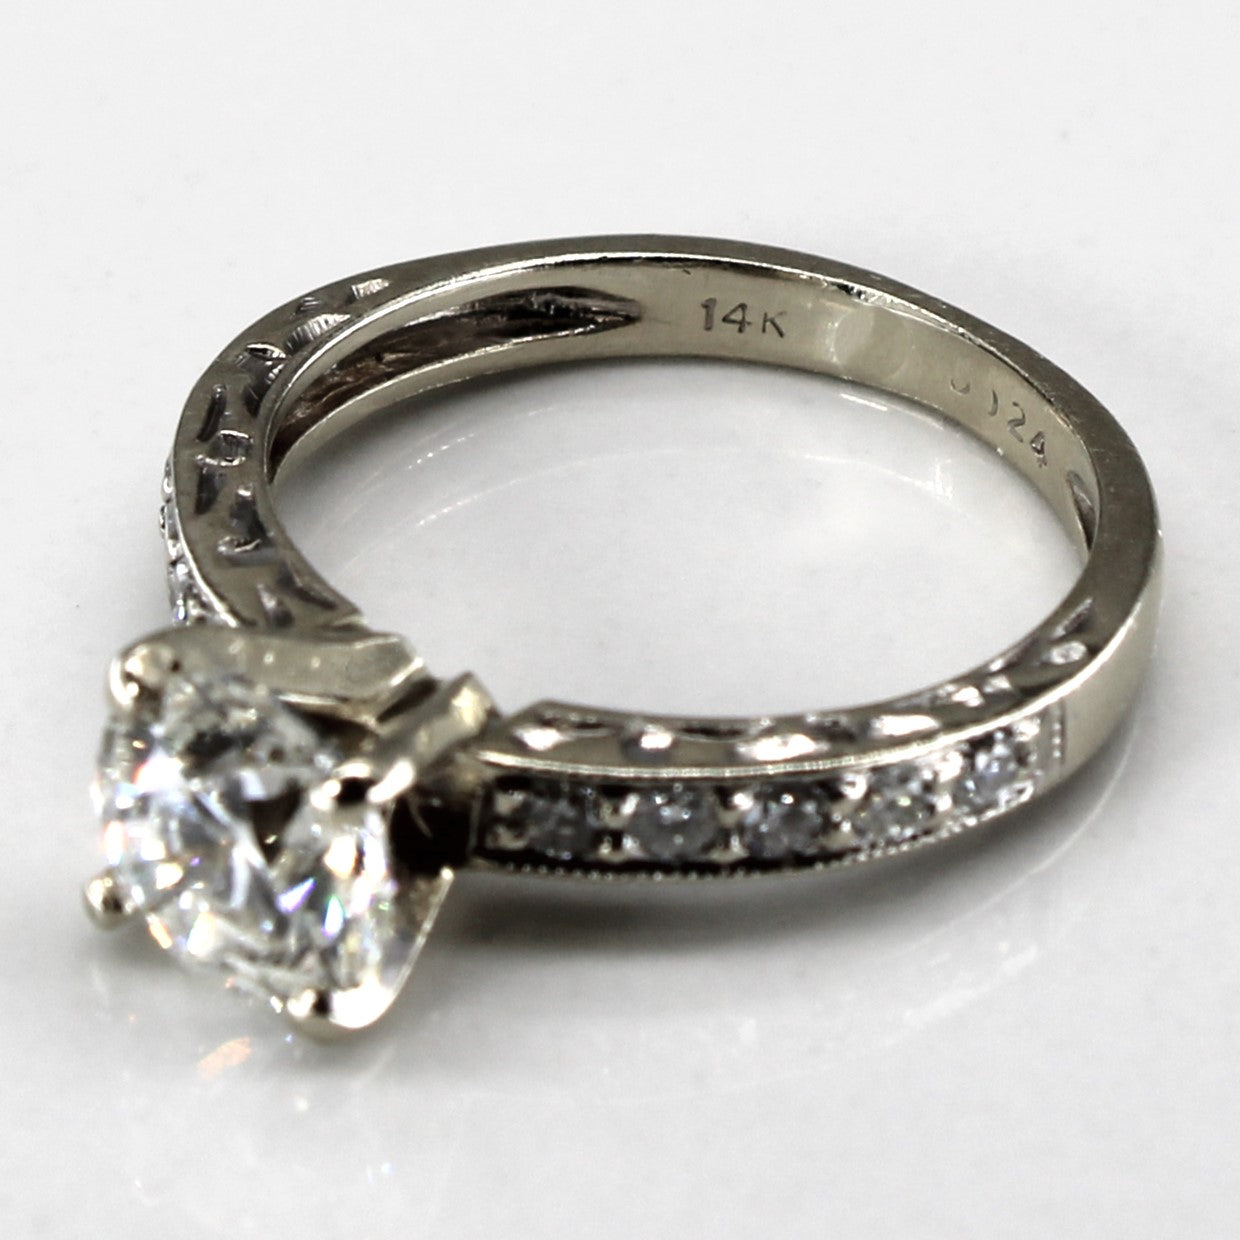 Solitaire with Accents Diamond Engagement Ring | 1.27ctw | SZ 4.5 |